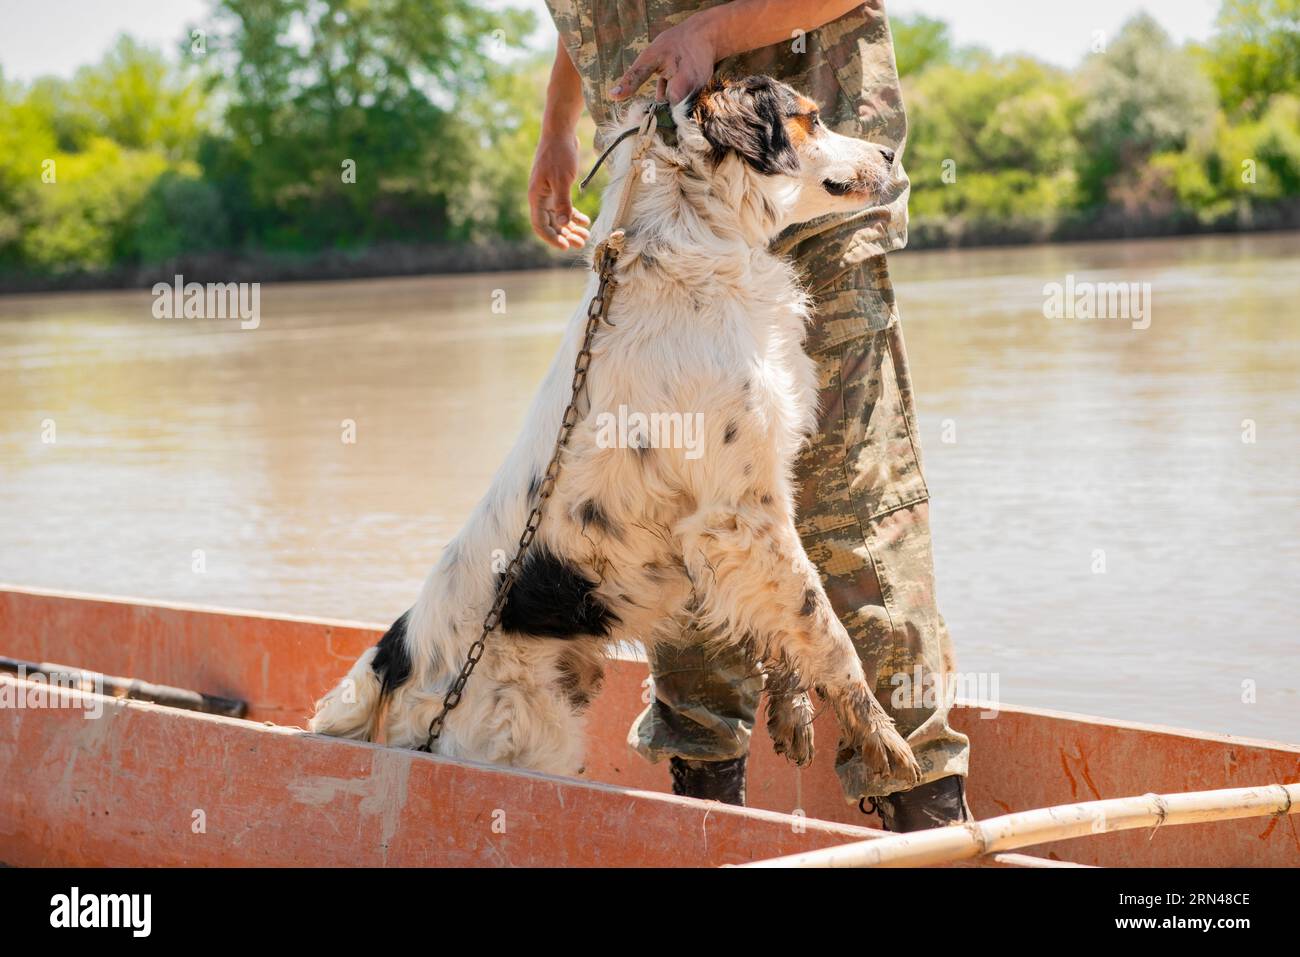 Fisherman in camouflage outfit pulling wet pet dog out of wooden boat after  fishing Stock Photo - Alamy